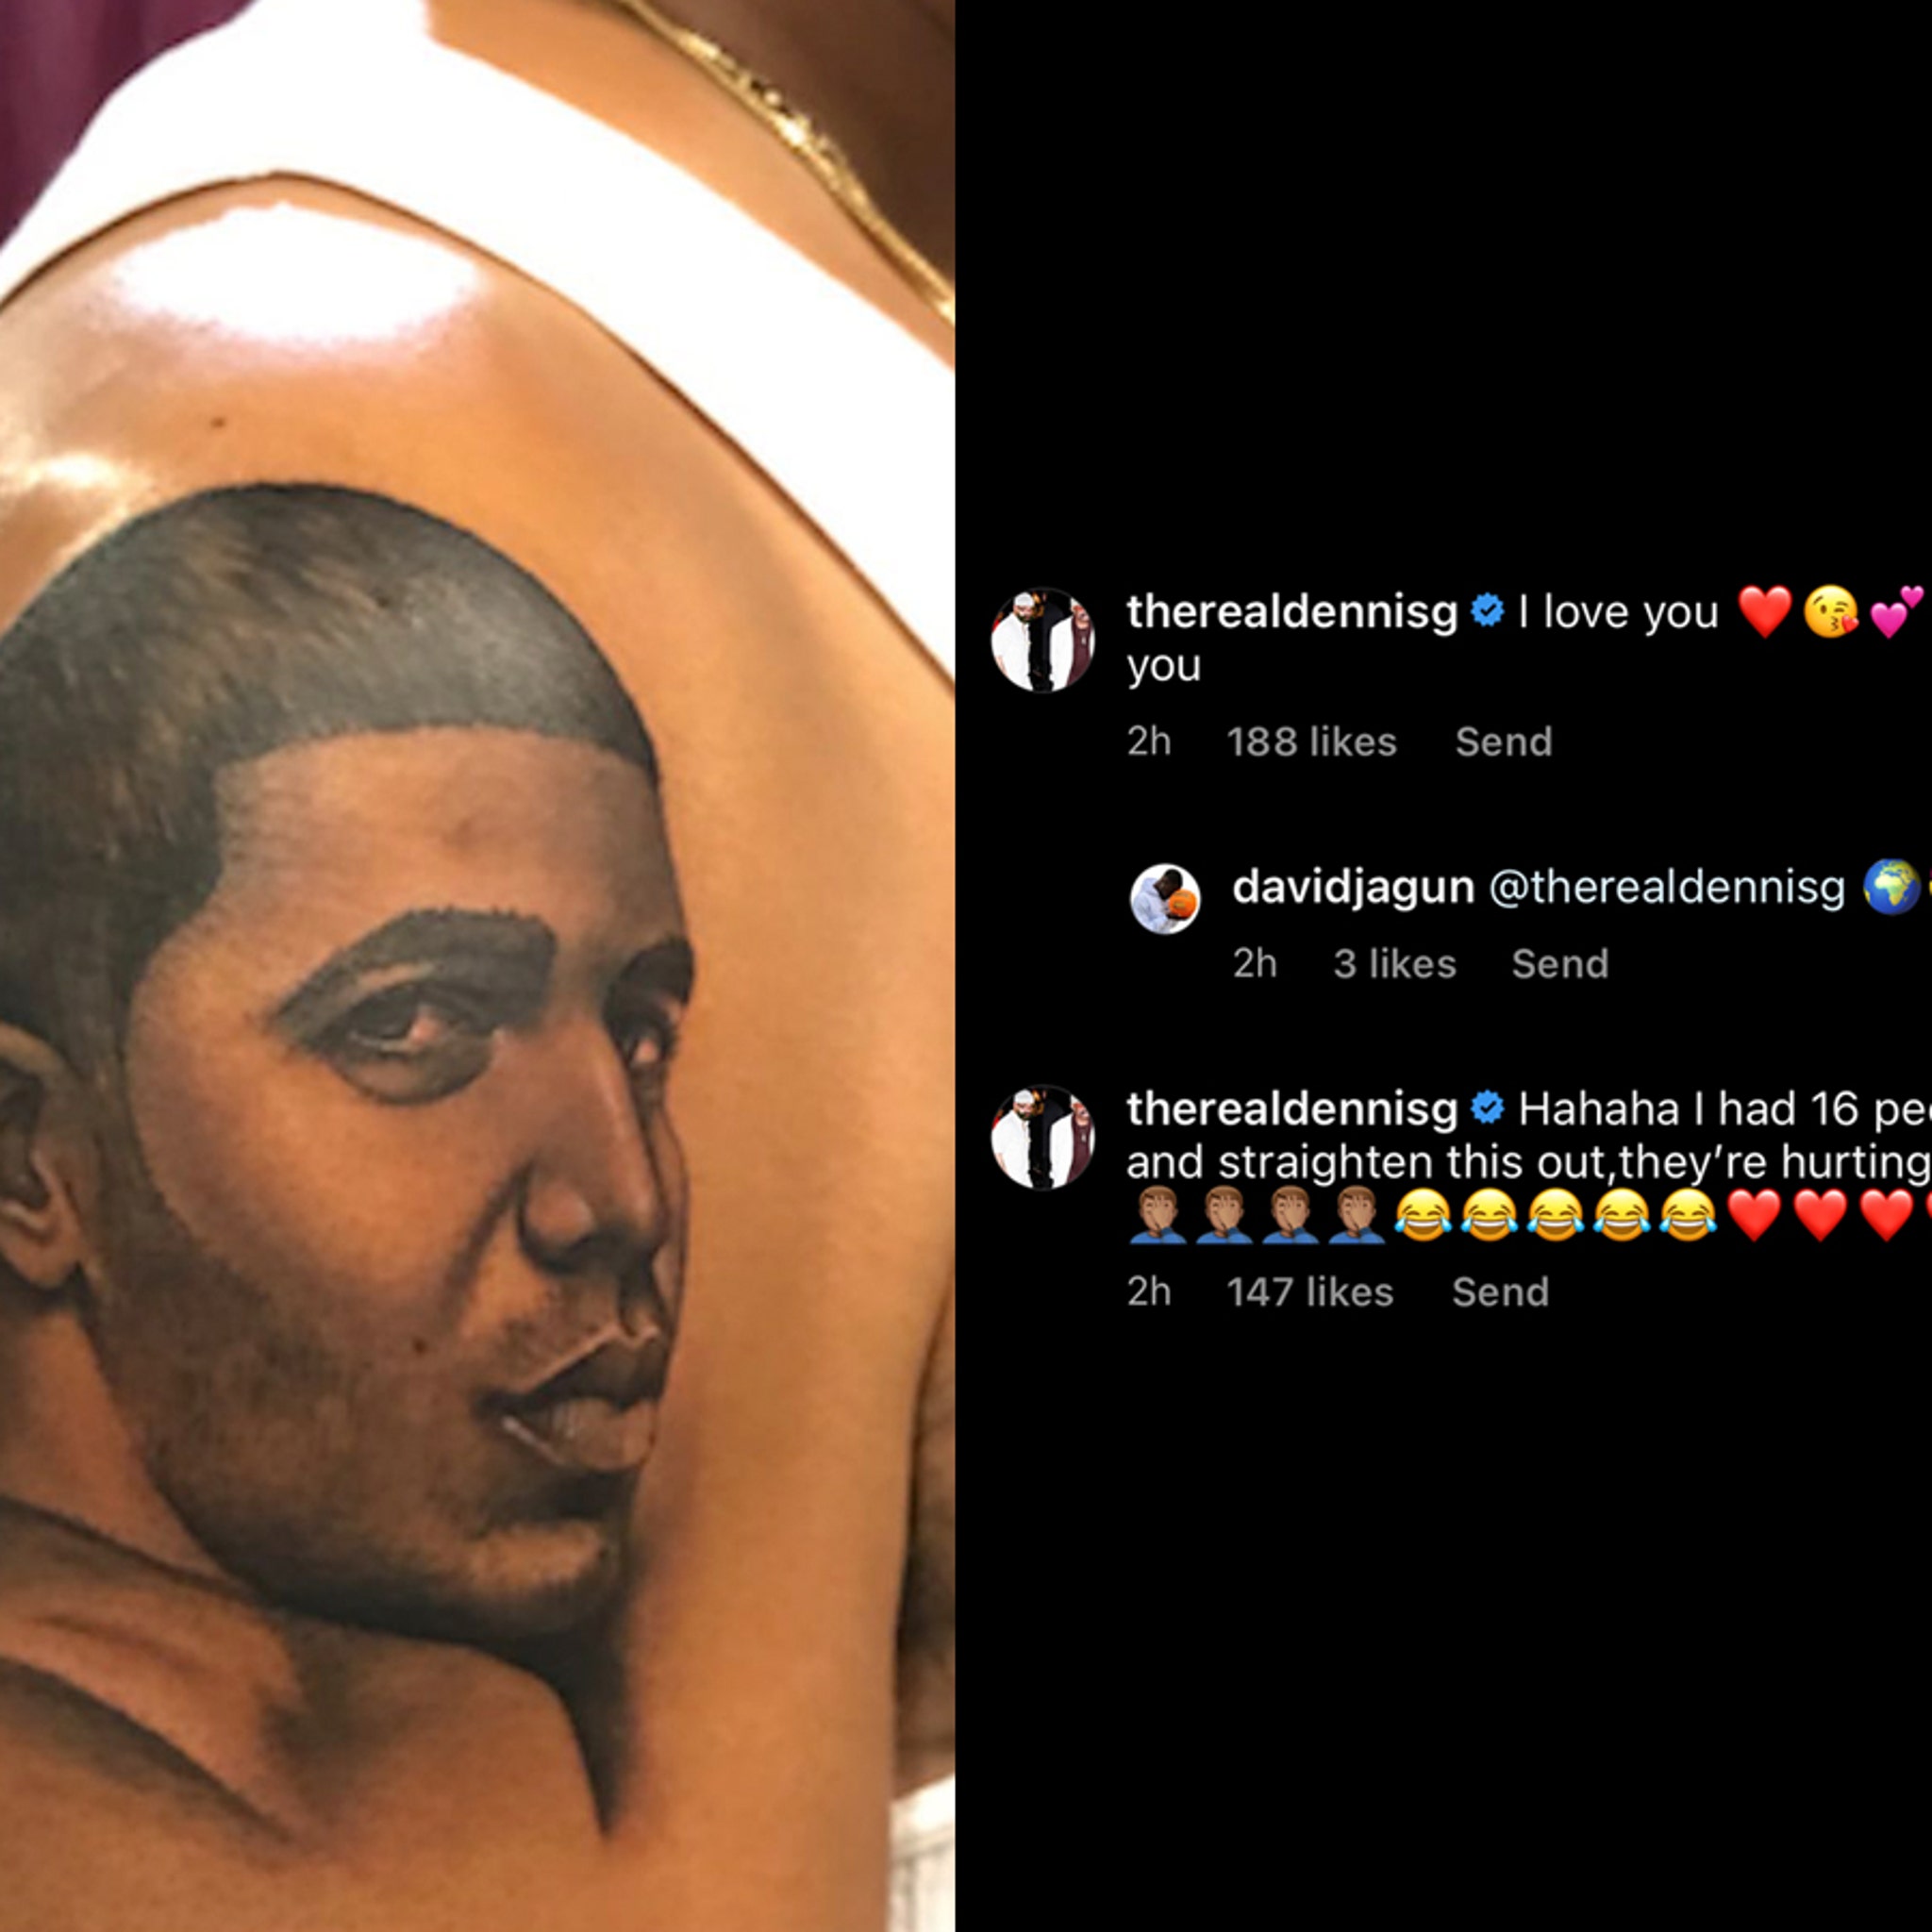 Drake Has a Huge New Tattoo That Looks Just Like Lil Waynes Face  See  the Ink  Entertainment Tonight